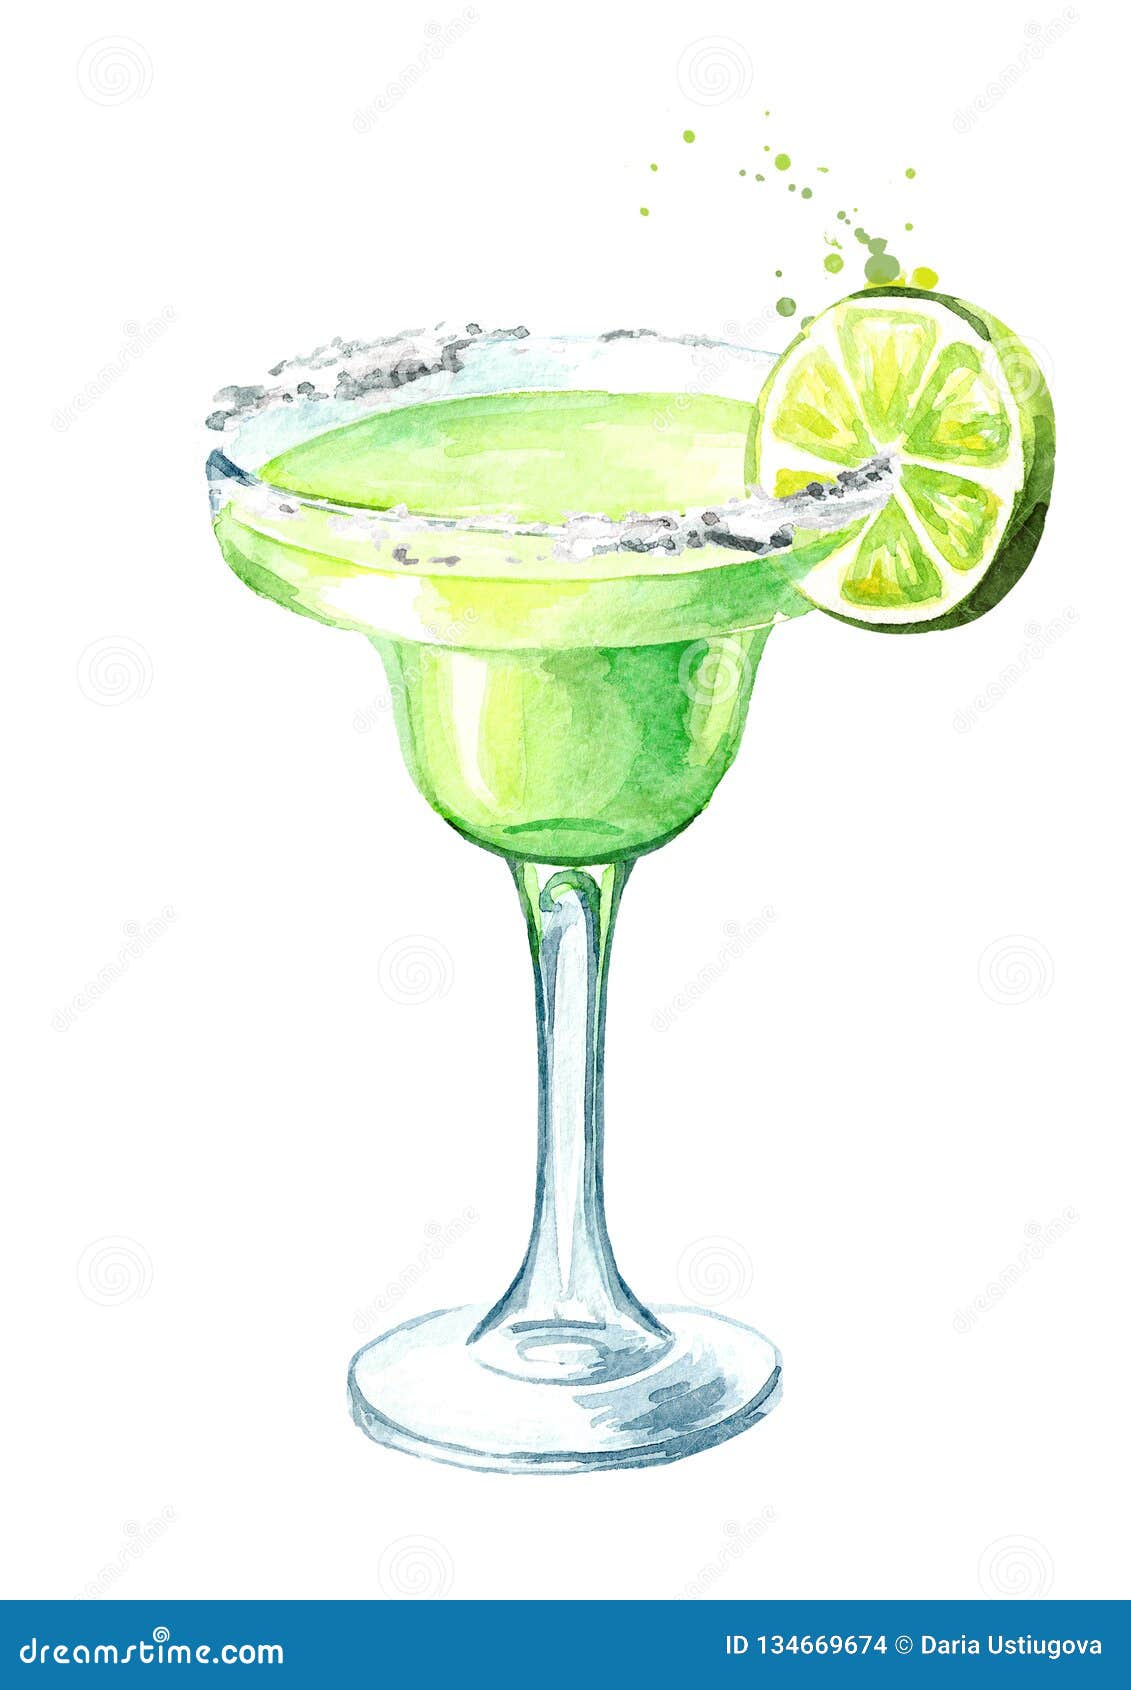 Glass of Classics Margarita Cocktail with Lime and Salt. Watercolor